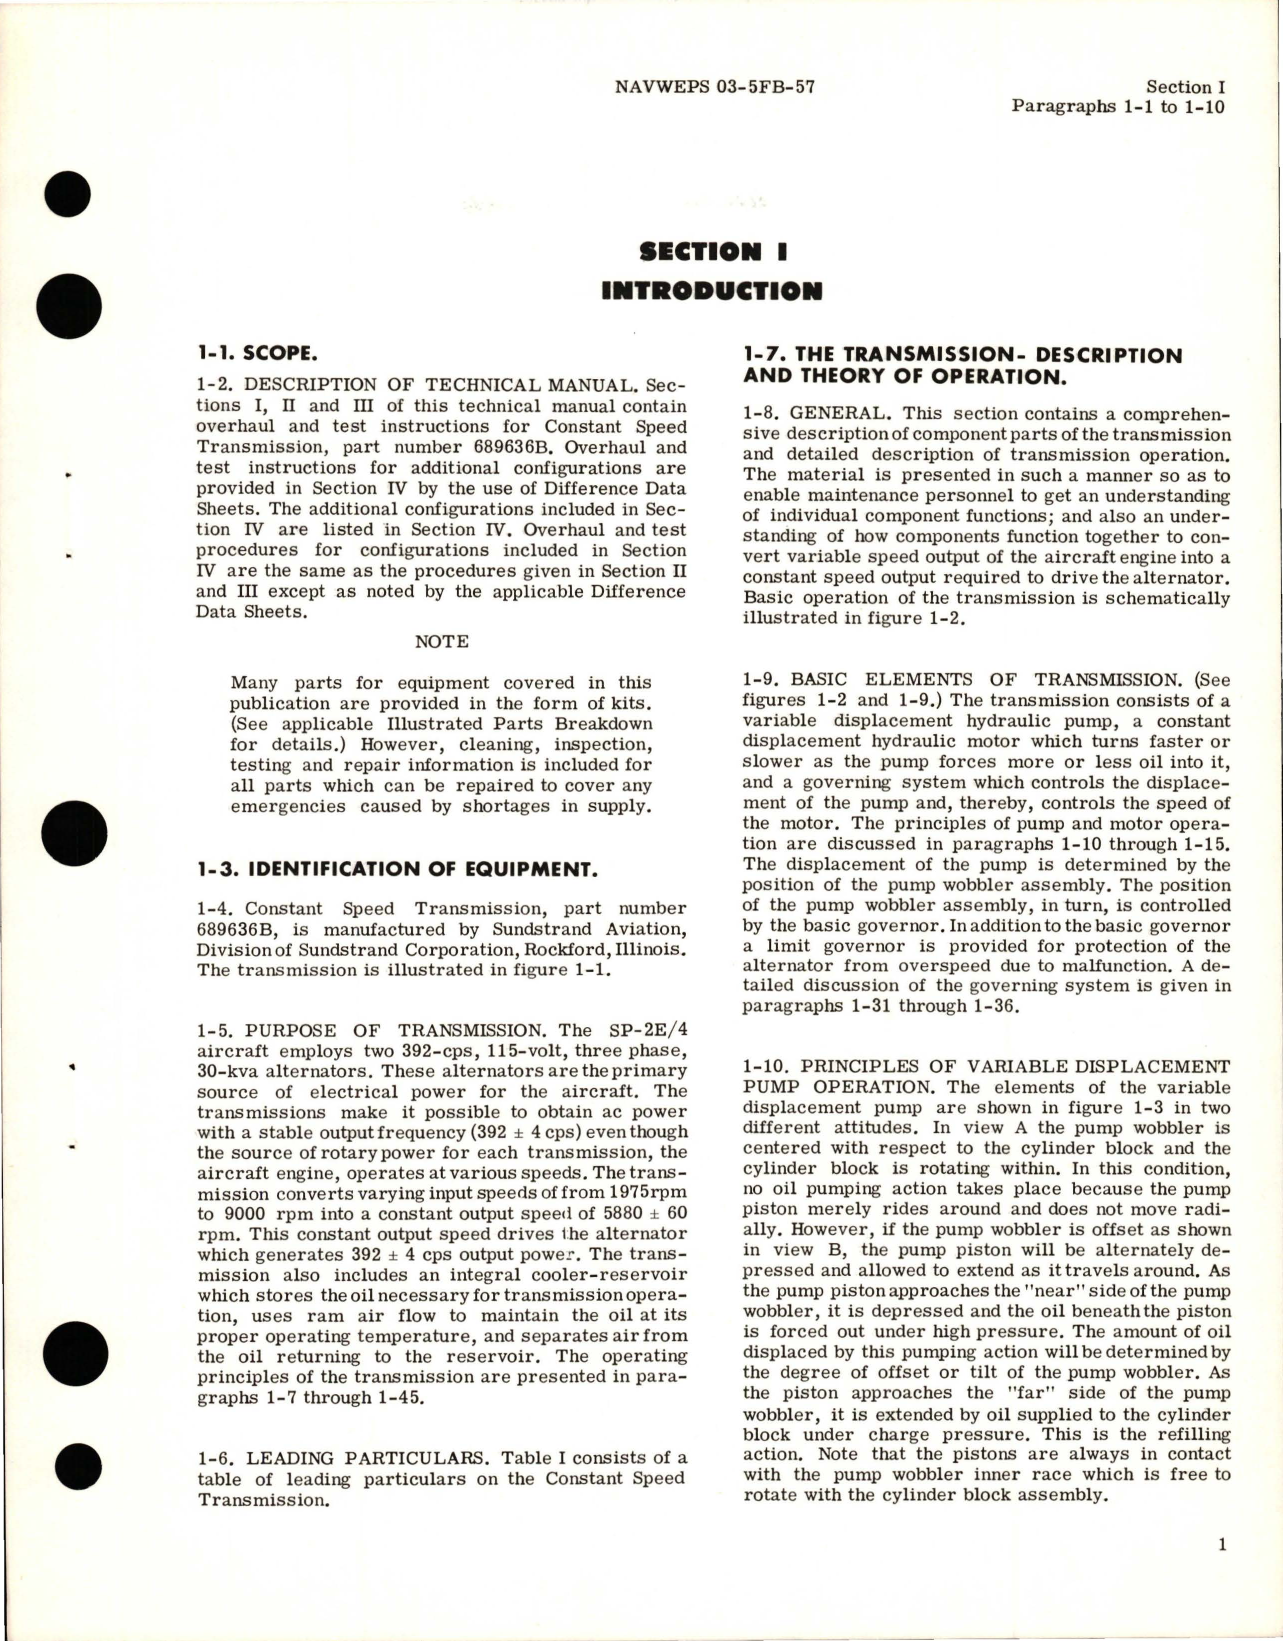 Sample page 7 from AirCorps Library document: Overhaul Instructions for Constant Speed Transmission - Part 689636B